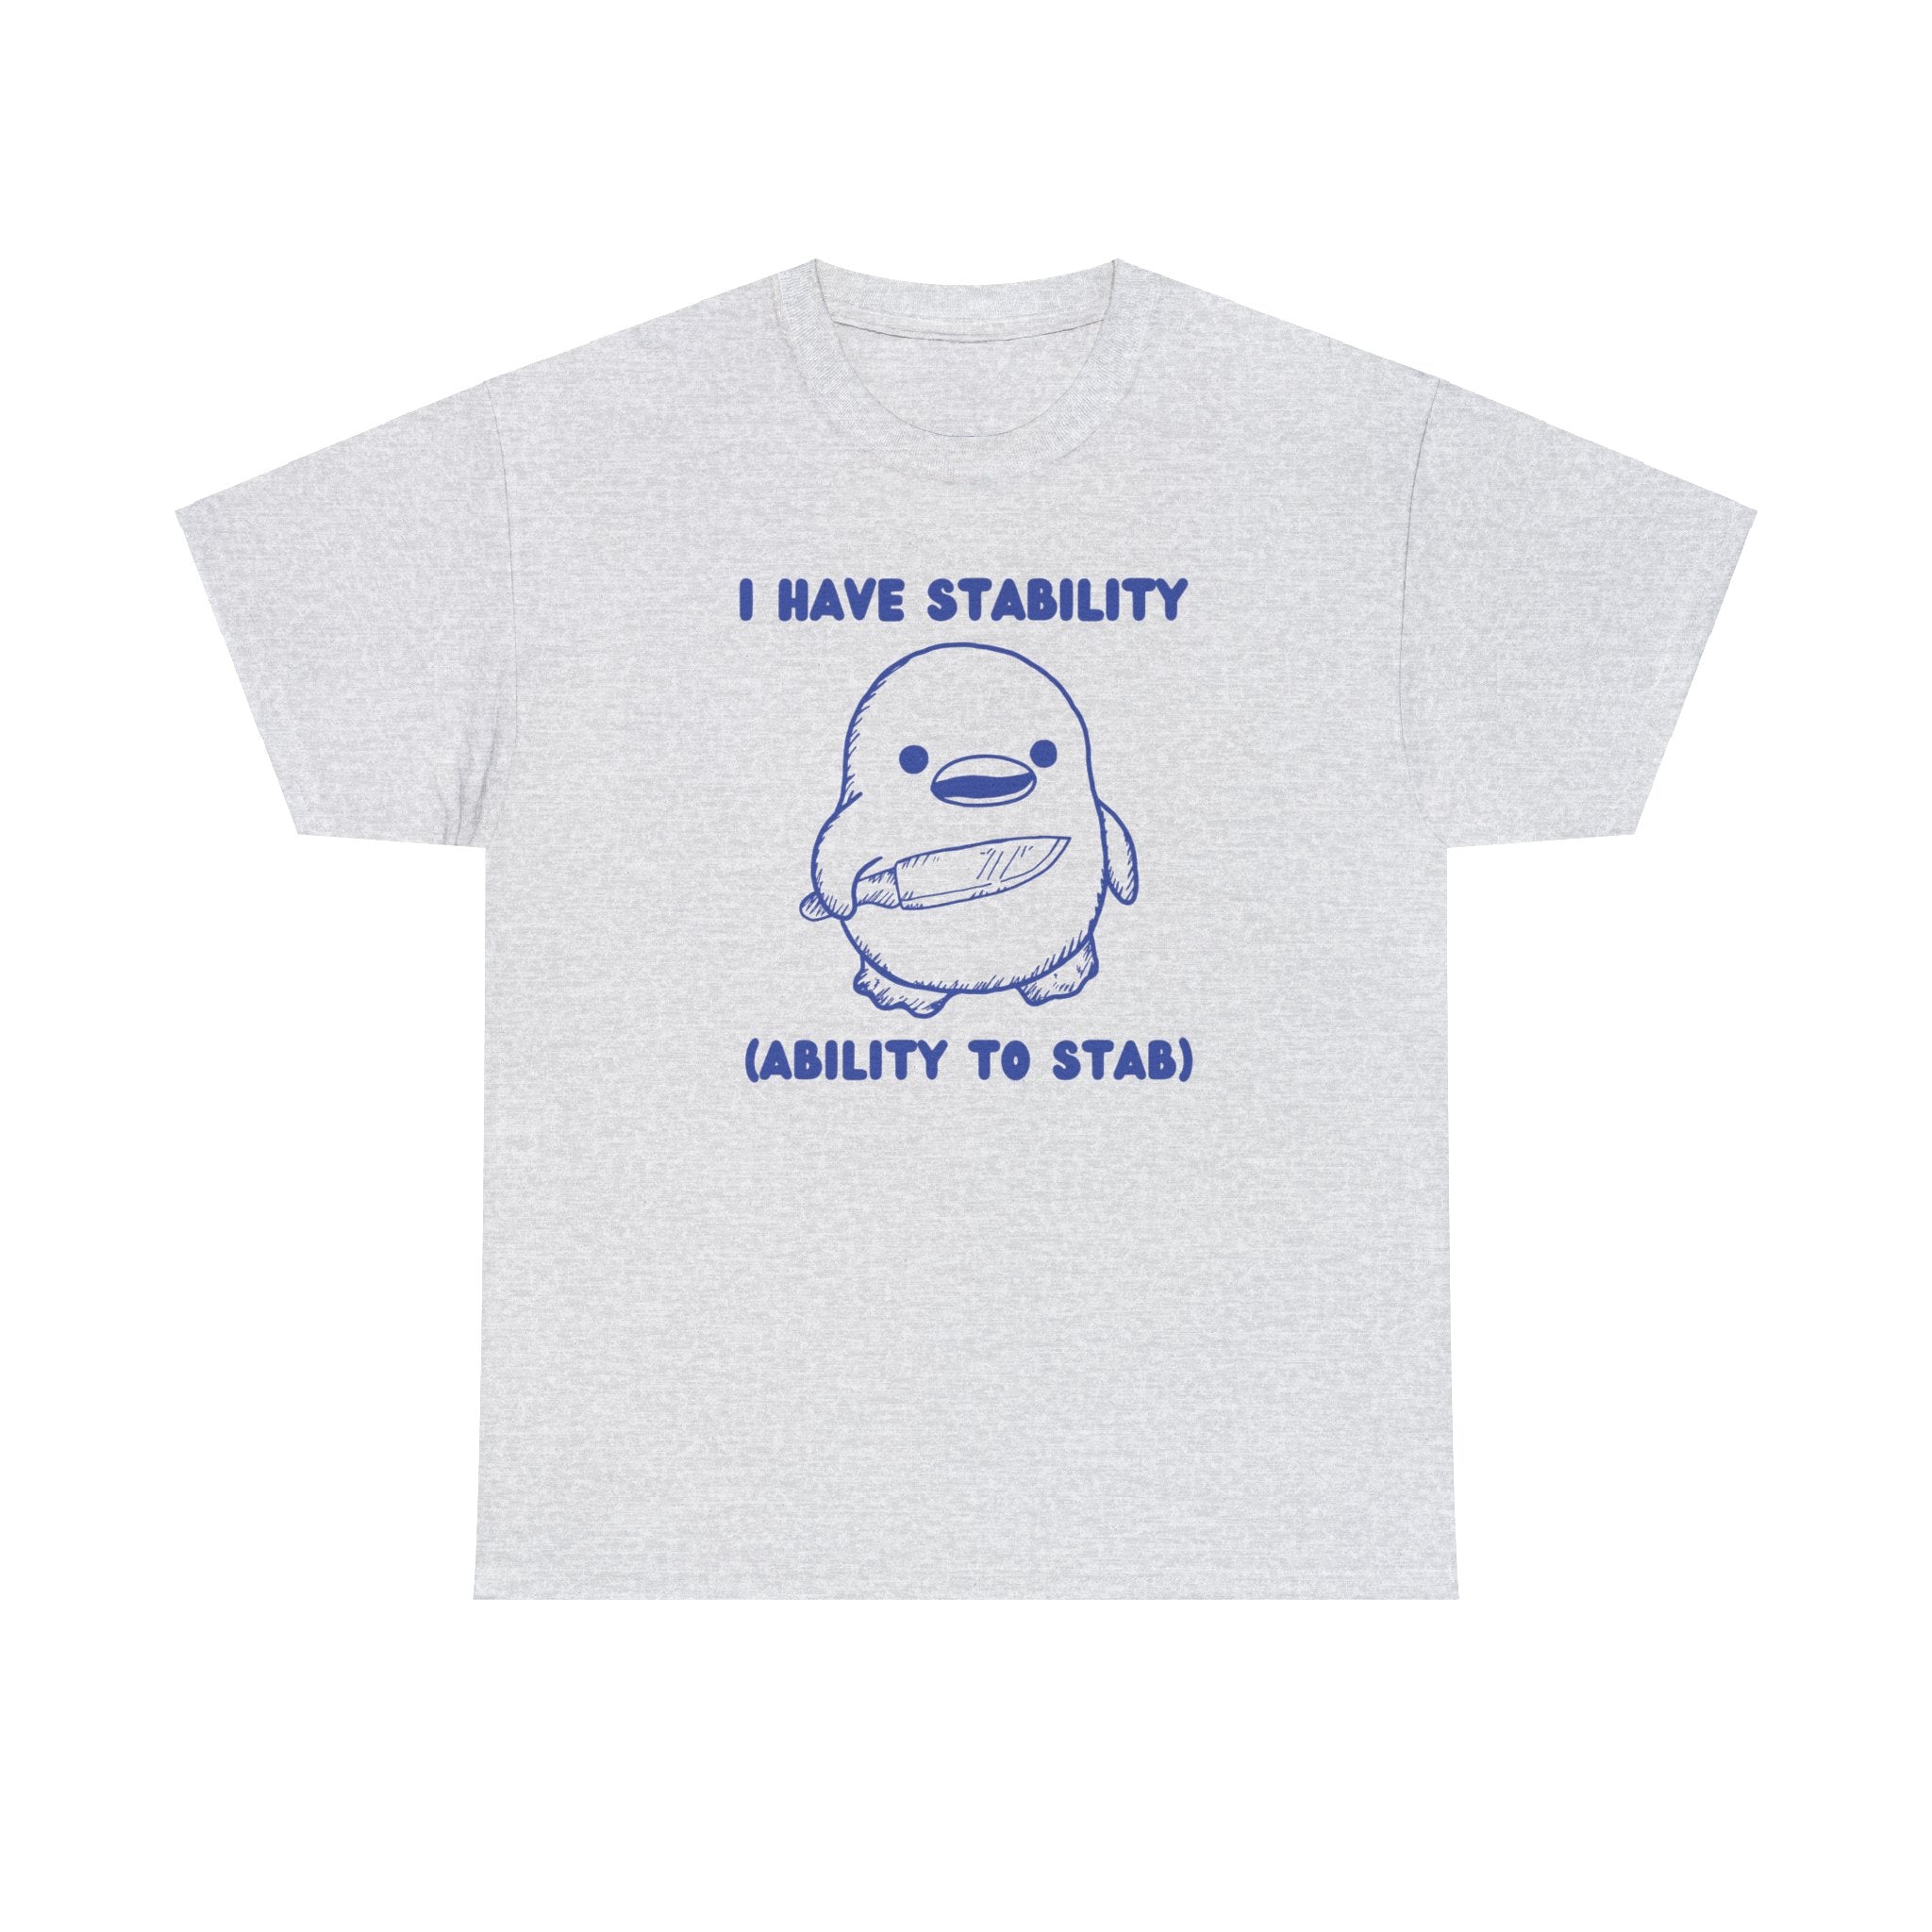 I have stability (ability to stab) shirt